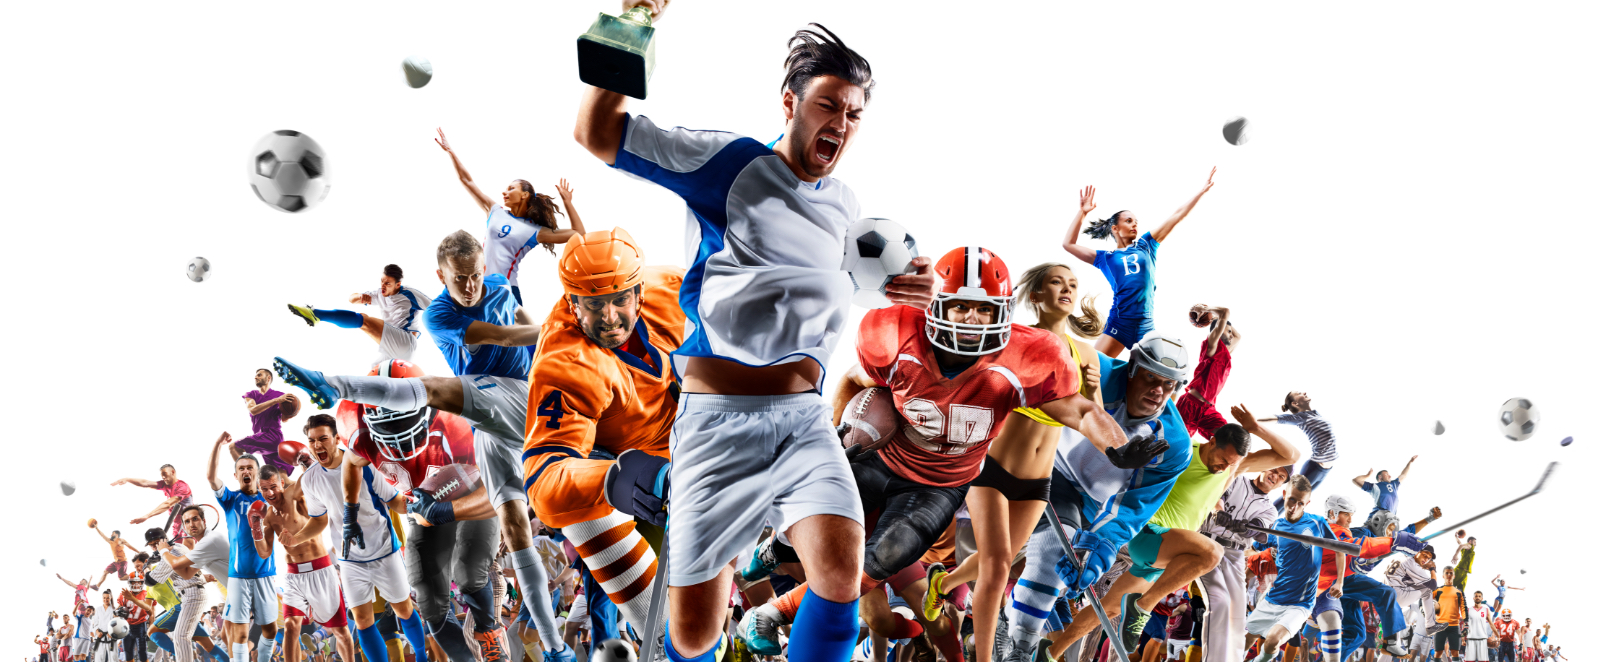 School athletic management system for scheduling, online ticketing, health